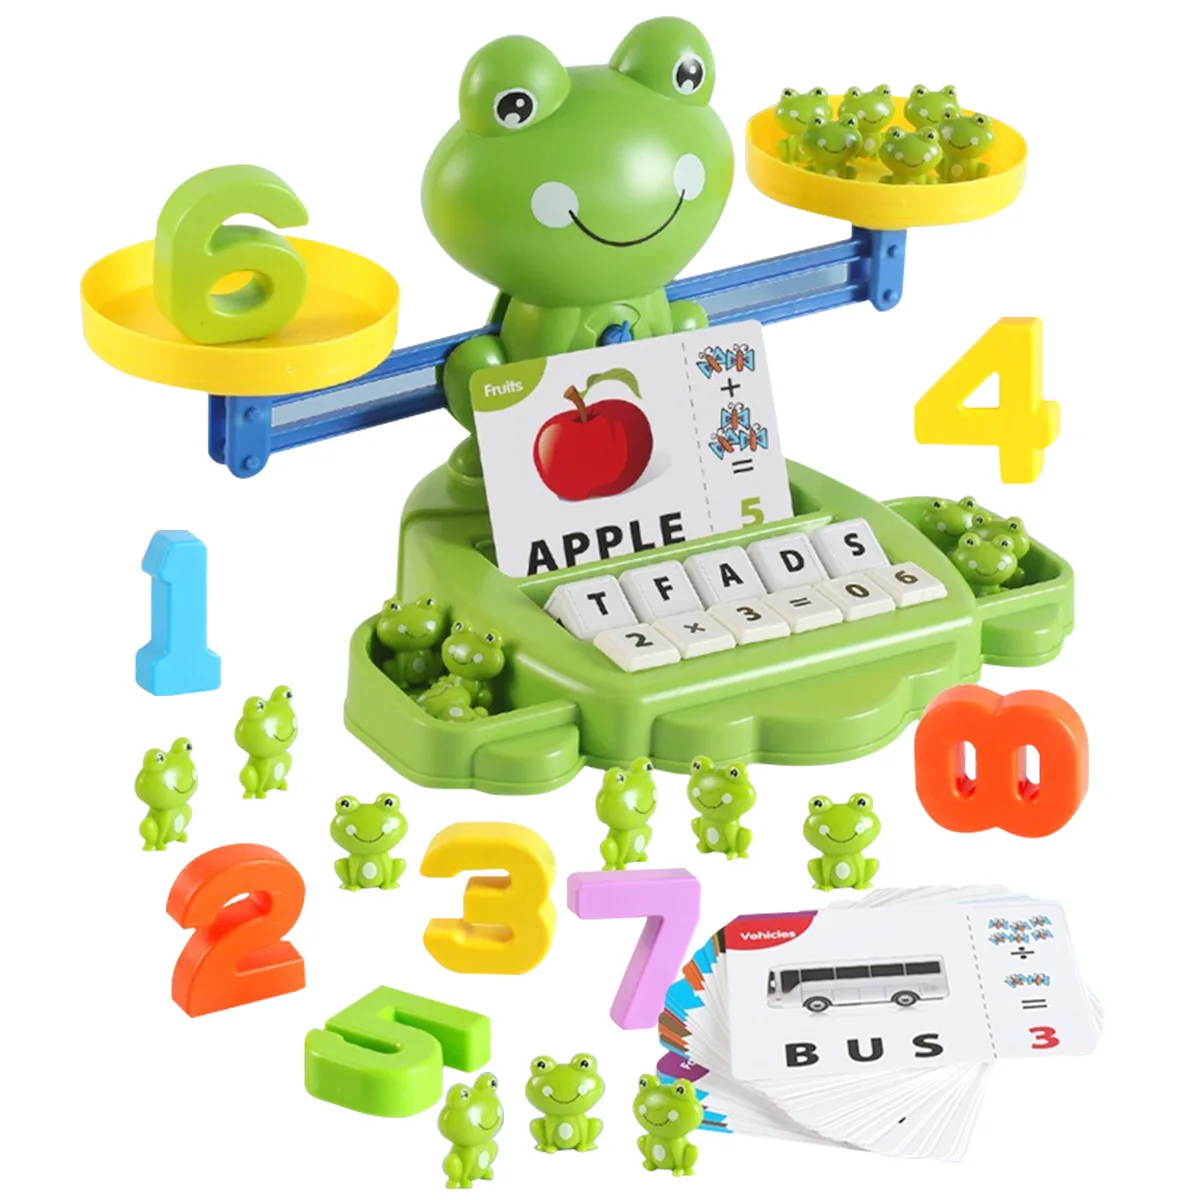 

Frog Balance Math Toy Kids Learning Counting Educational Balance Scale Toy Interactive Math Counting Toy for Boys Girls Gift